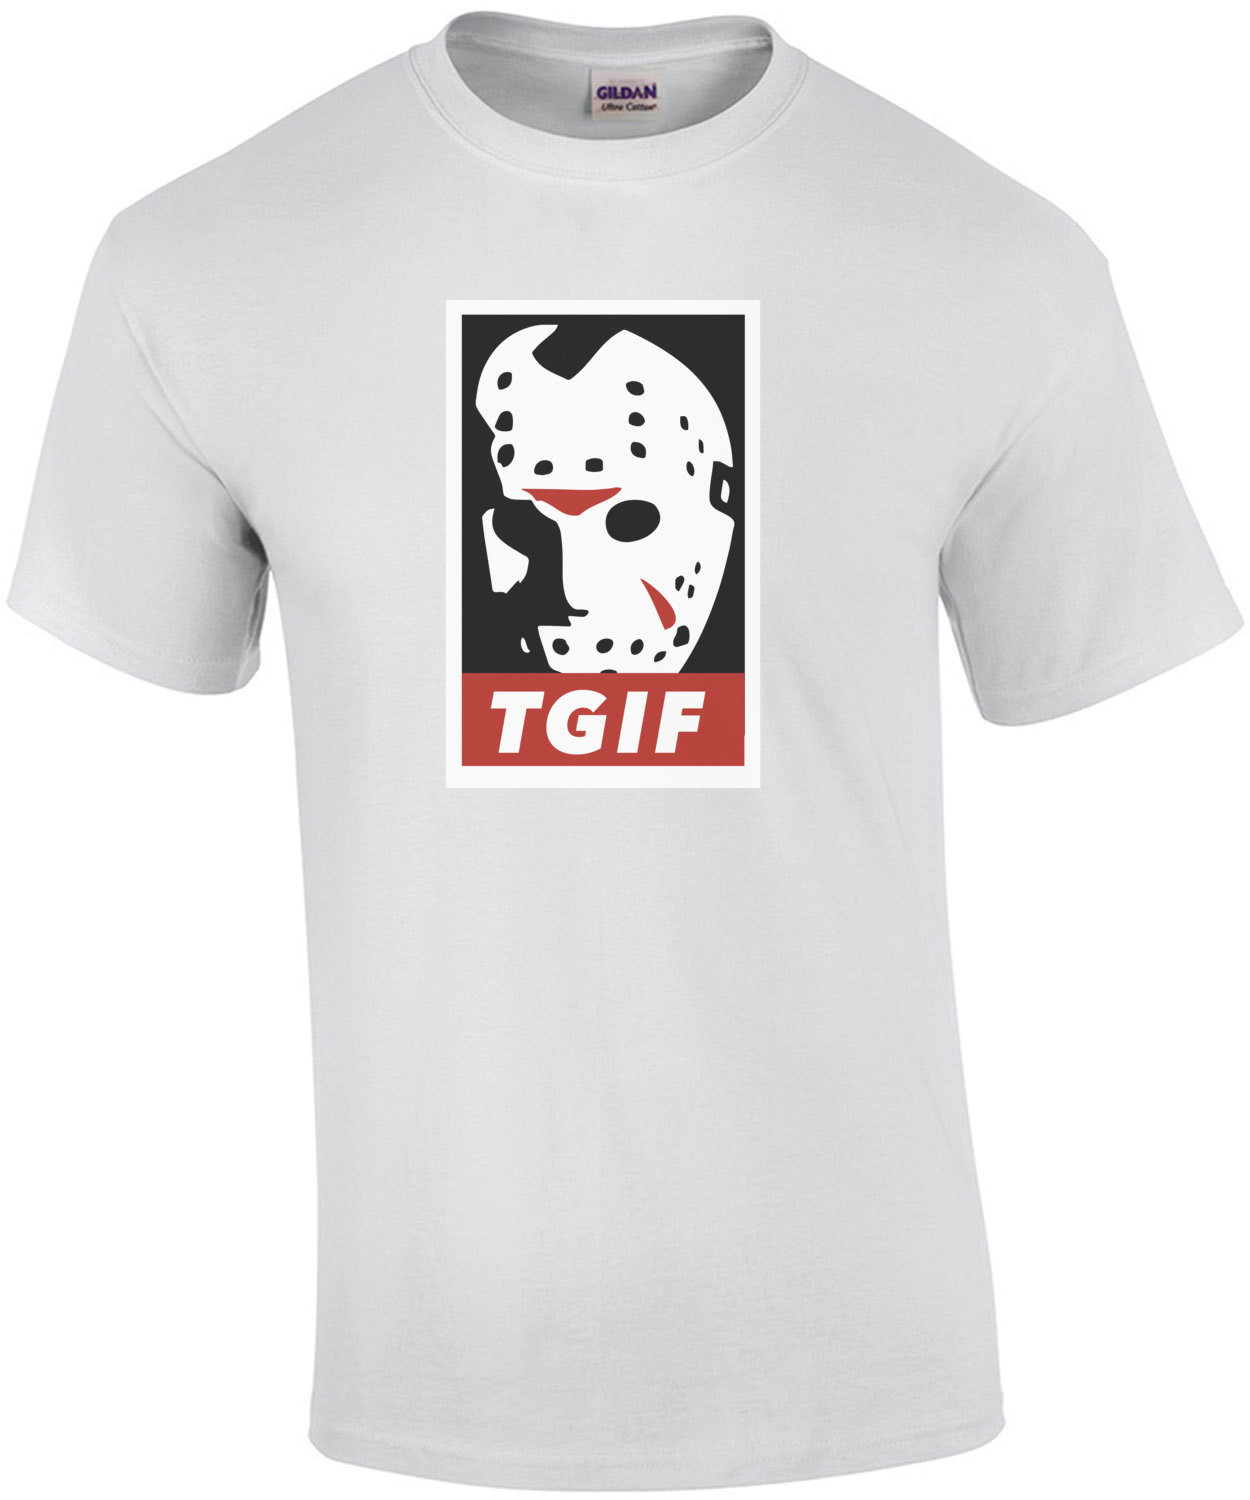 TGIF - Jason Voorhees - Friday the 13th t-shirt